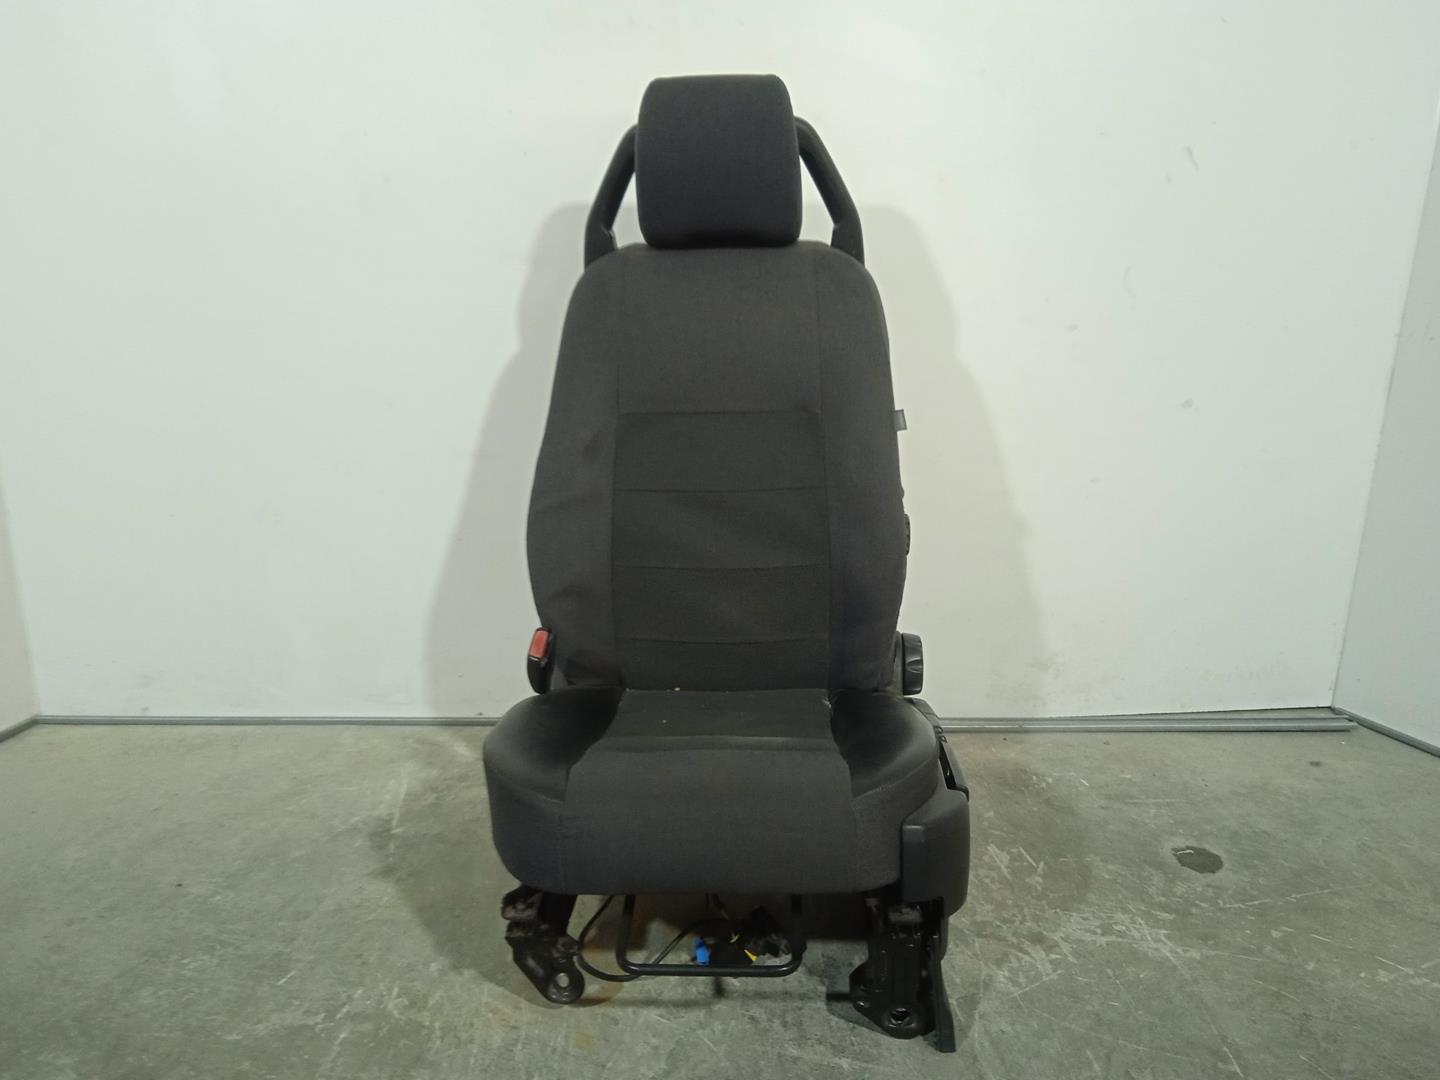 LAND ROVER Discovery 4 generation (2009-2016) Front Left Seat 4493121, TELAGRIS, 5PUERTAS 20690898